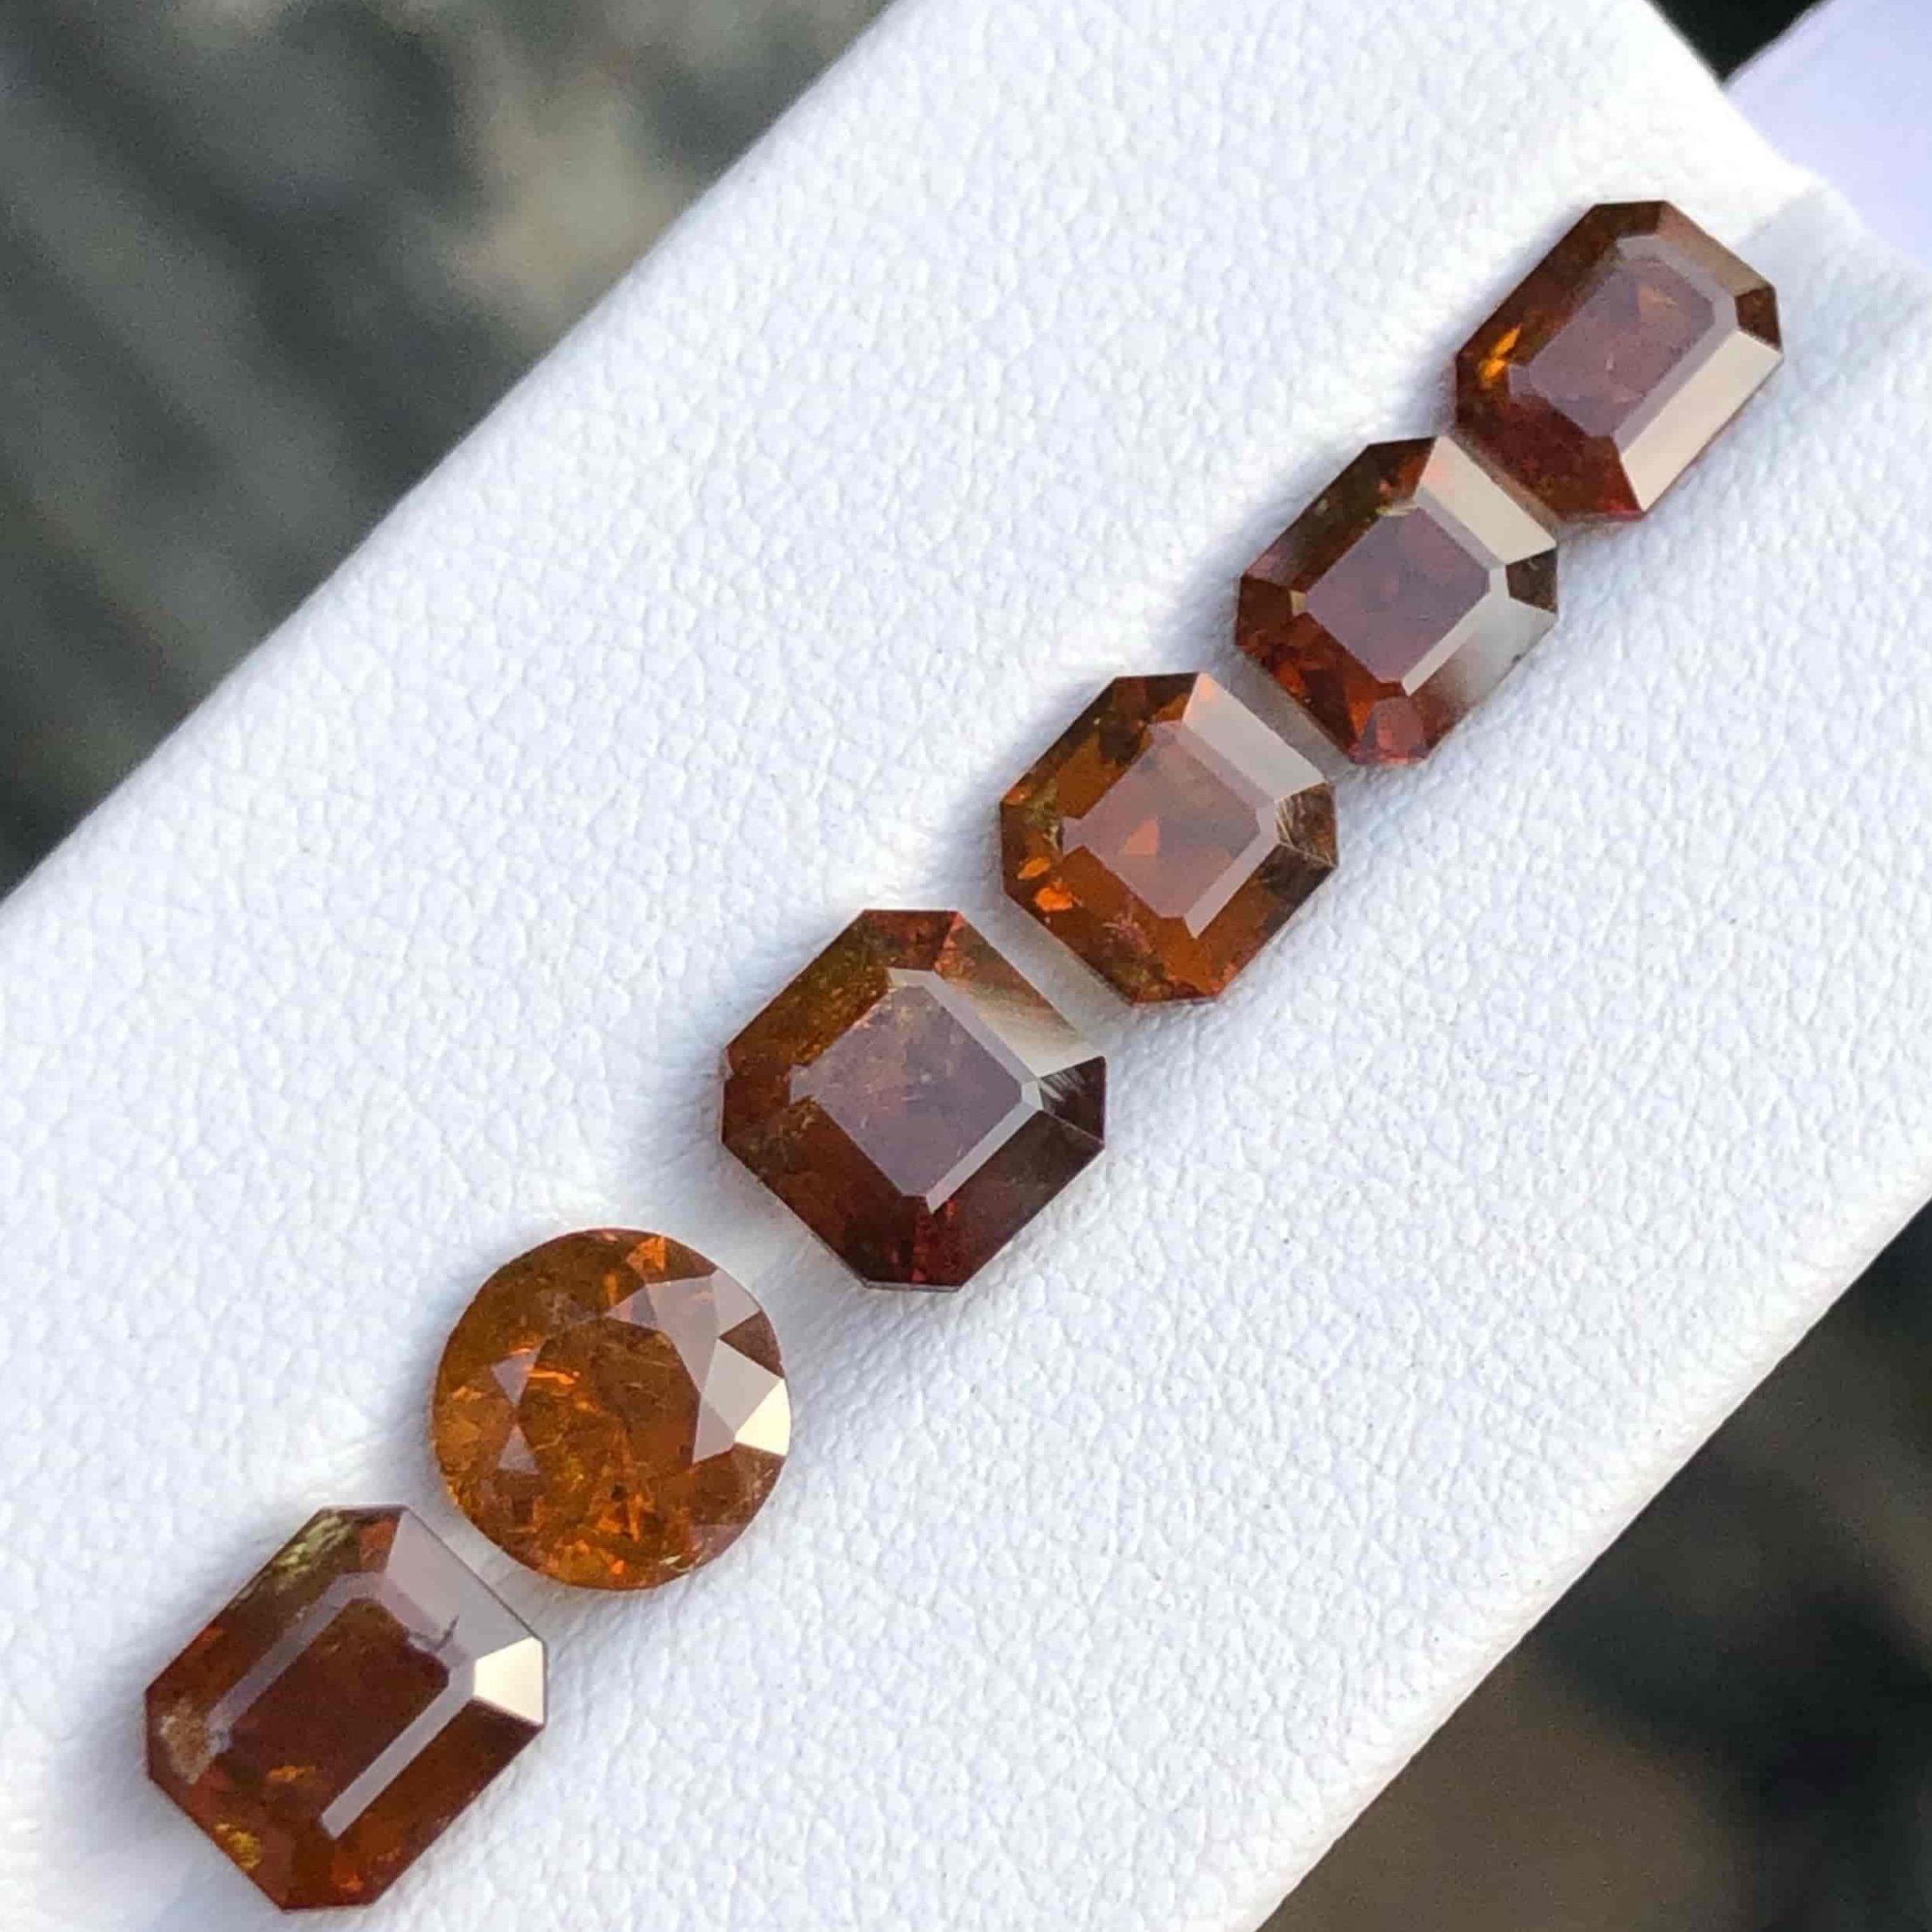 Gemstone Type Natural Mali Garnet Lot
Weight 10.15 carats
Weight Range	1.40 to 2.35 carats
Clarity Included
Shape Fancy Cut
Origin Mali
Treatment None





Introducing the captivating 10.15 carats Natural Brown Garnet Stones Lot, a collection of